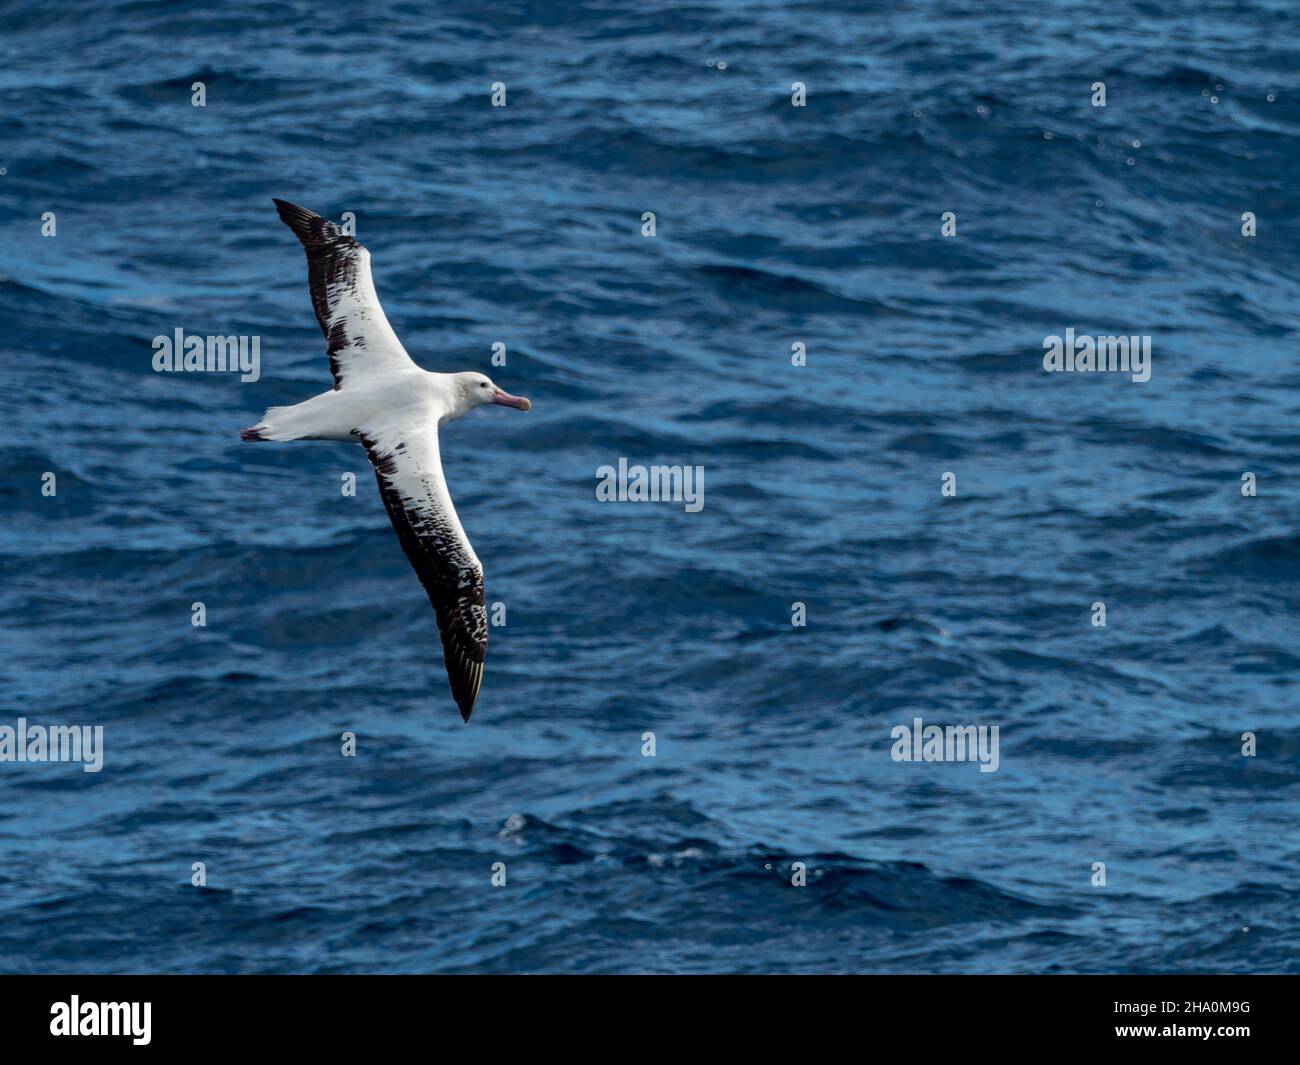 A Wandering albatross, Diomedea exulans, glides over the southern ocean Stock Photo